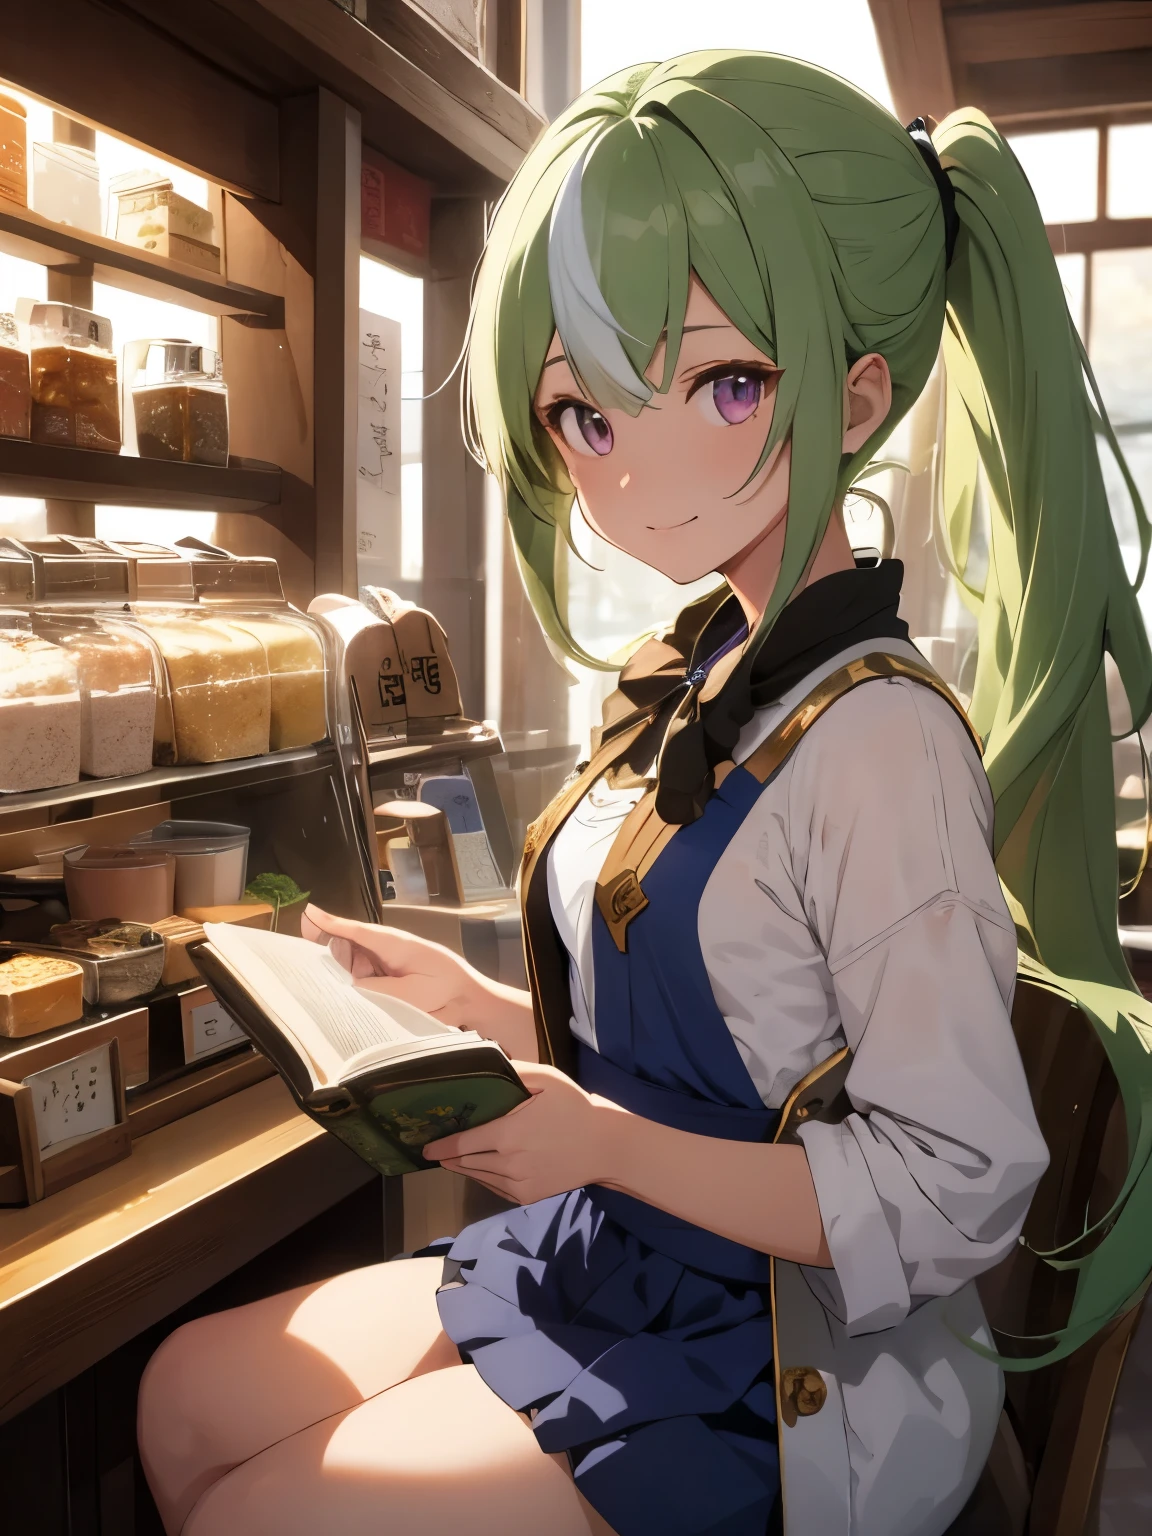 man in a tea shop, sitting down, reading a book, male, green hair, long hair, high ponytail, detailed eyes, keqing from genshin impact, genshin impact character, genshin, baizhu li from genshin impact, ayaka game genshin impact, genshin impact, shadowverse style, genshin impact style, light green hair, purple hanfu, anime background, tea shop, warm, ambient light, golden motes, small smile, warm light